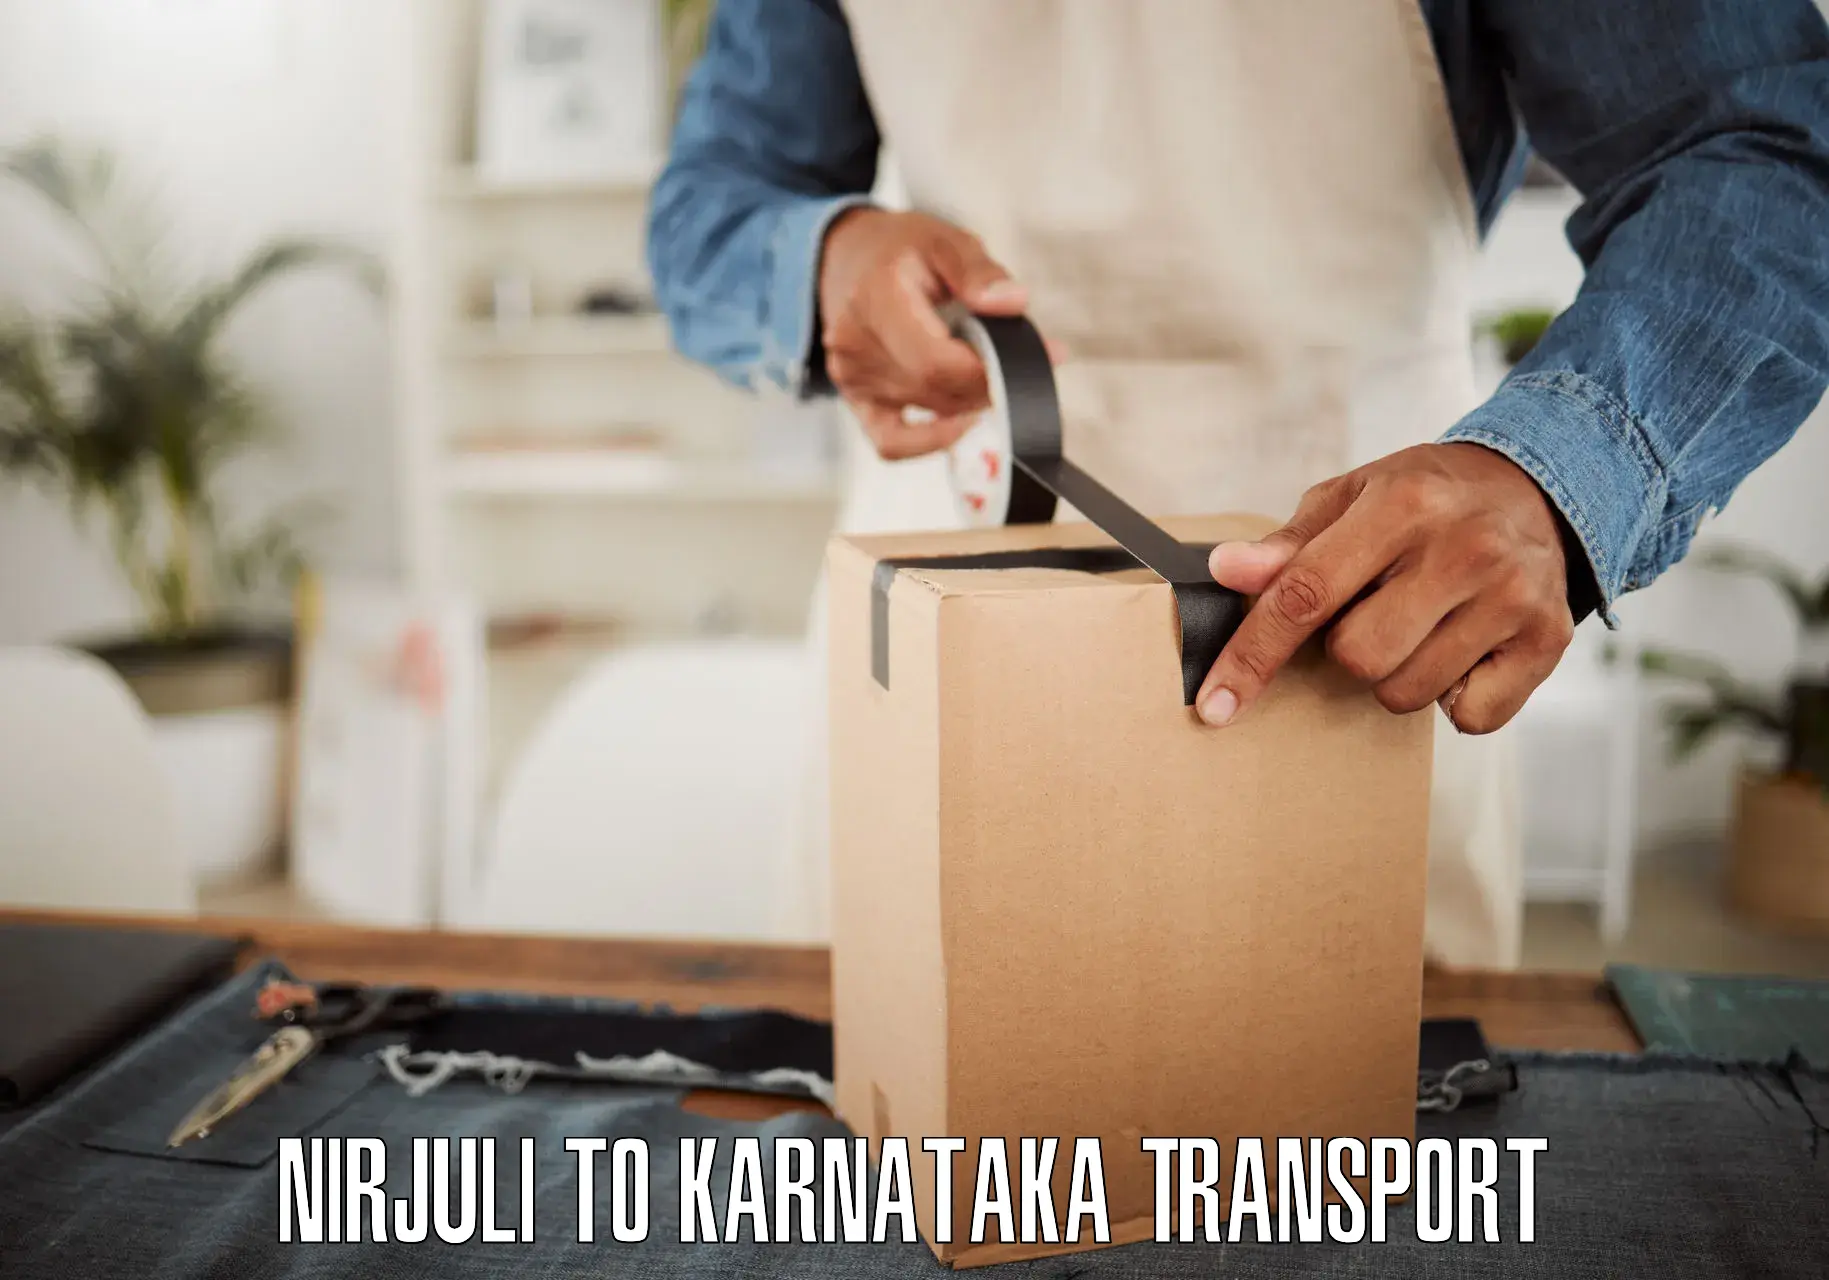 Transport bike from one state to another in Nirjuli to Karnataka